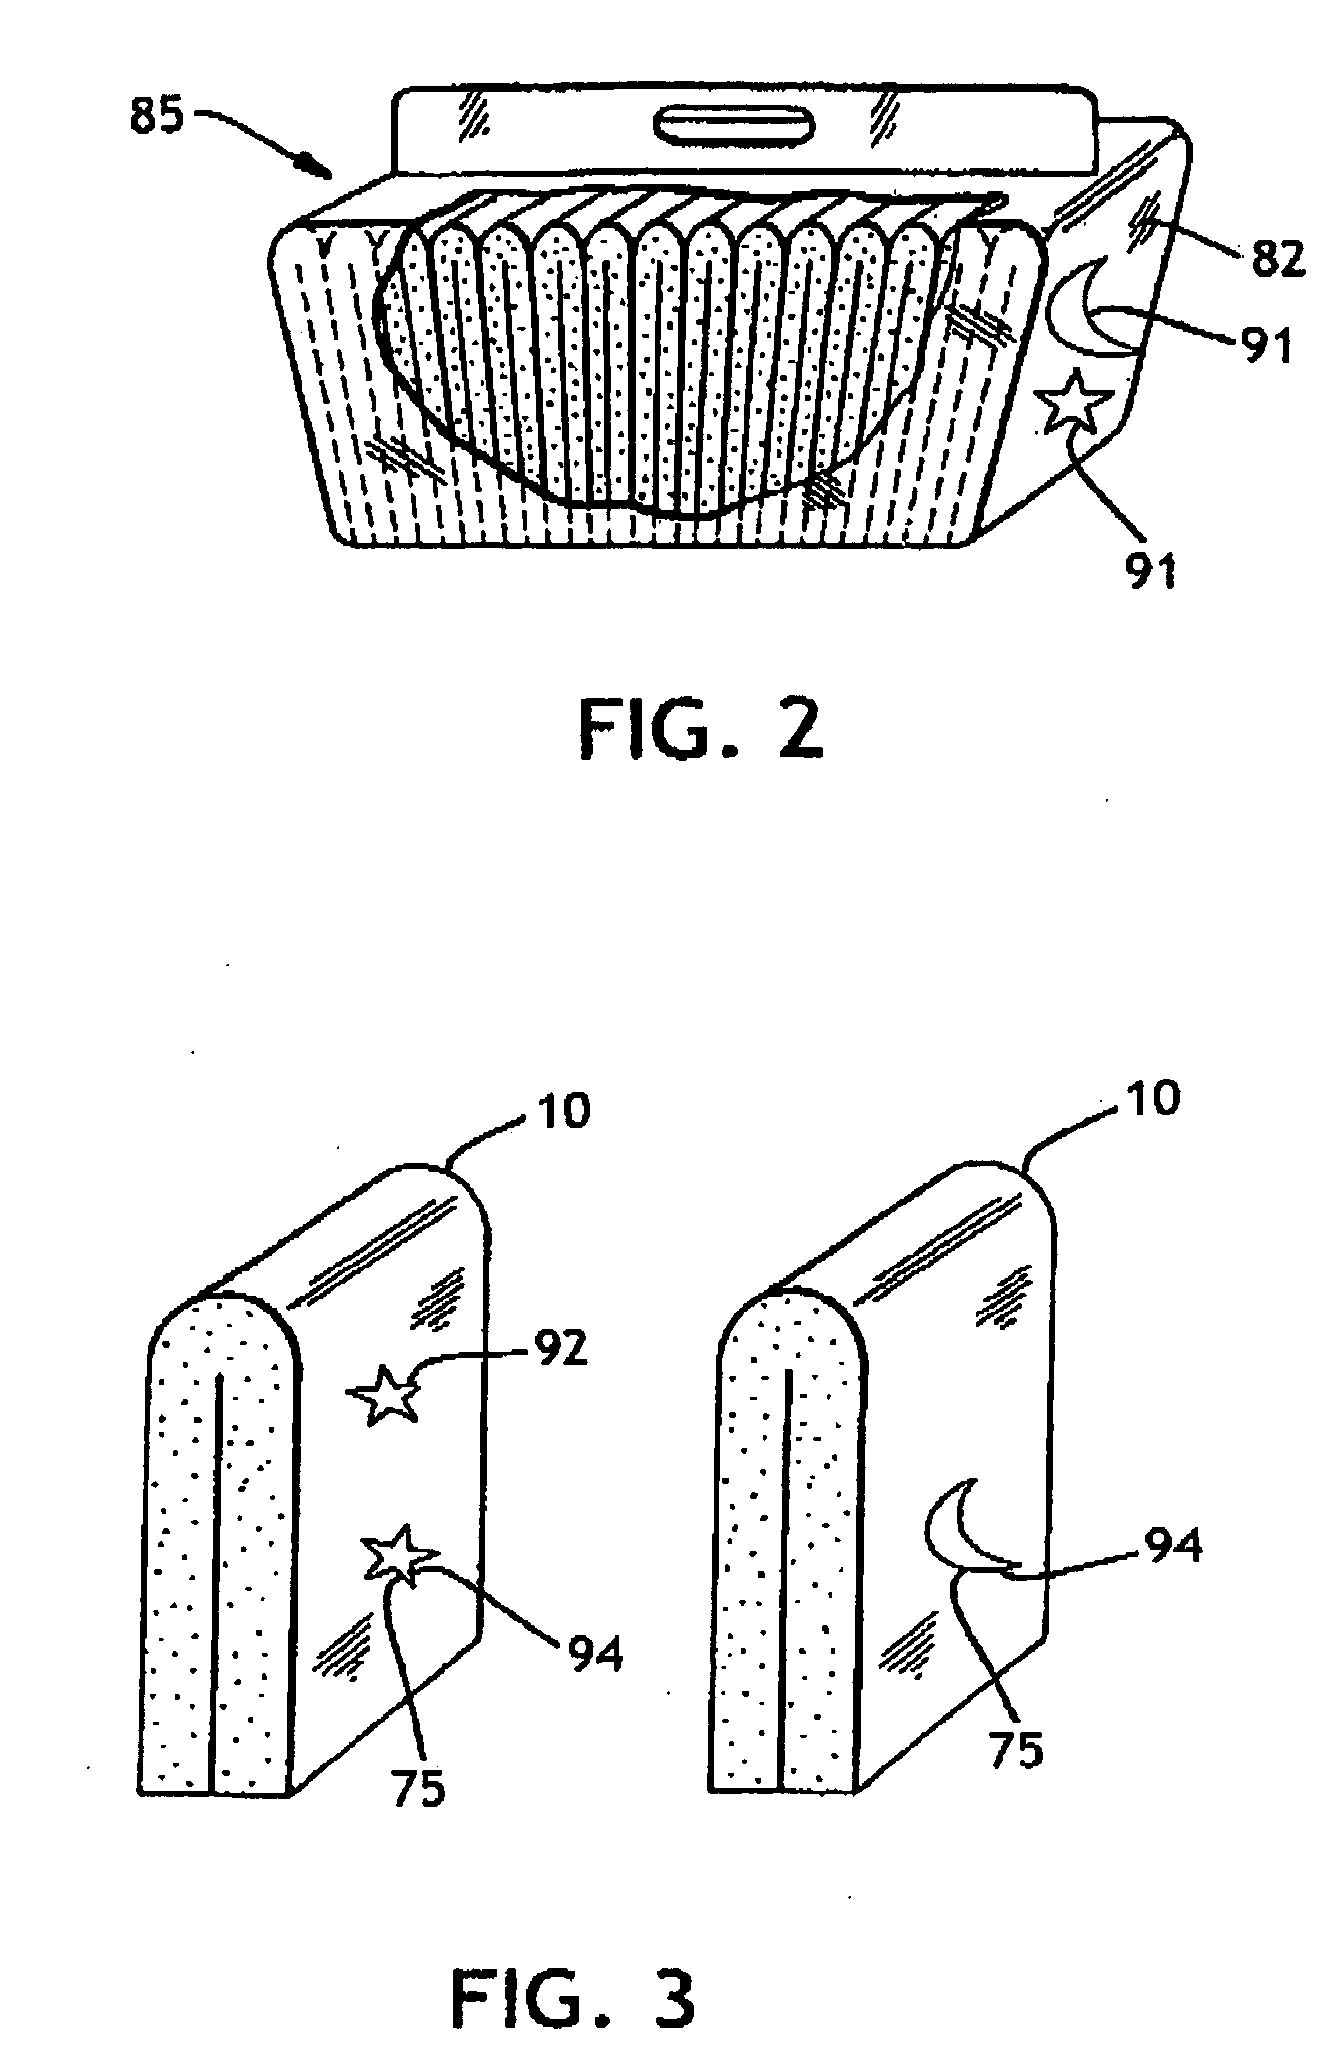 Methods for employing a cleansing device with inclusion